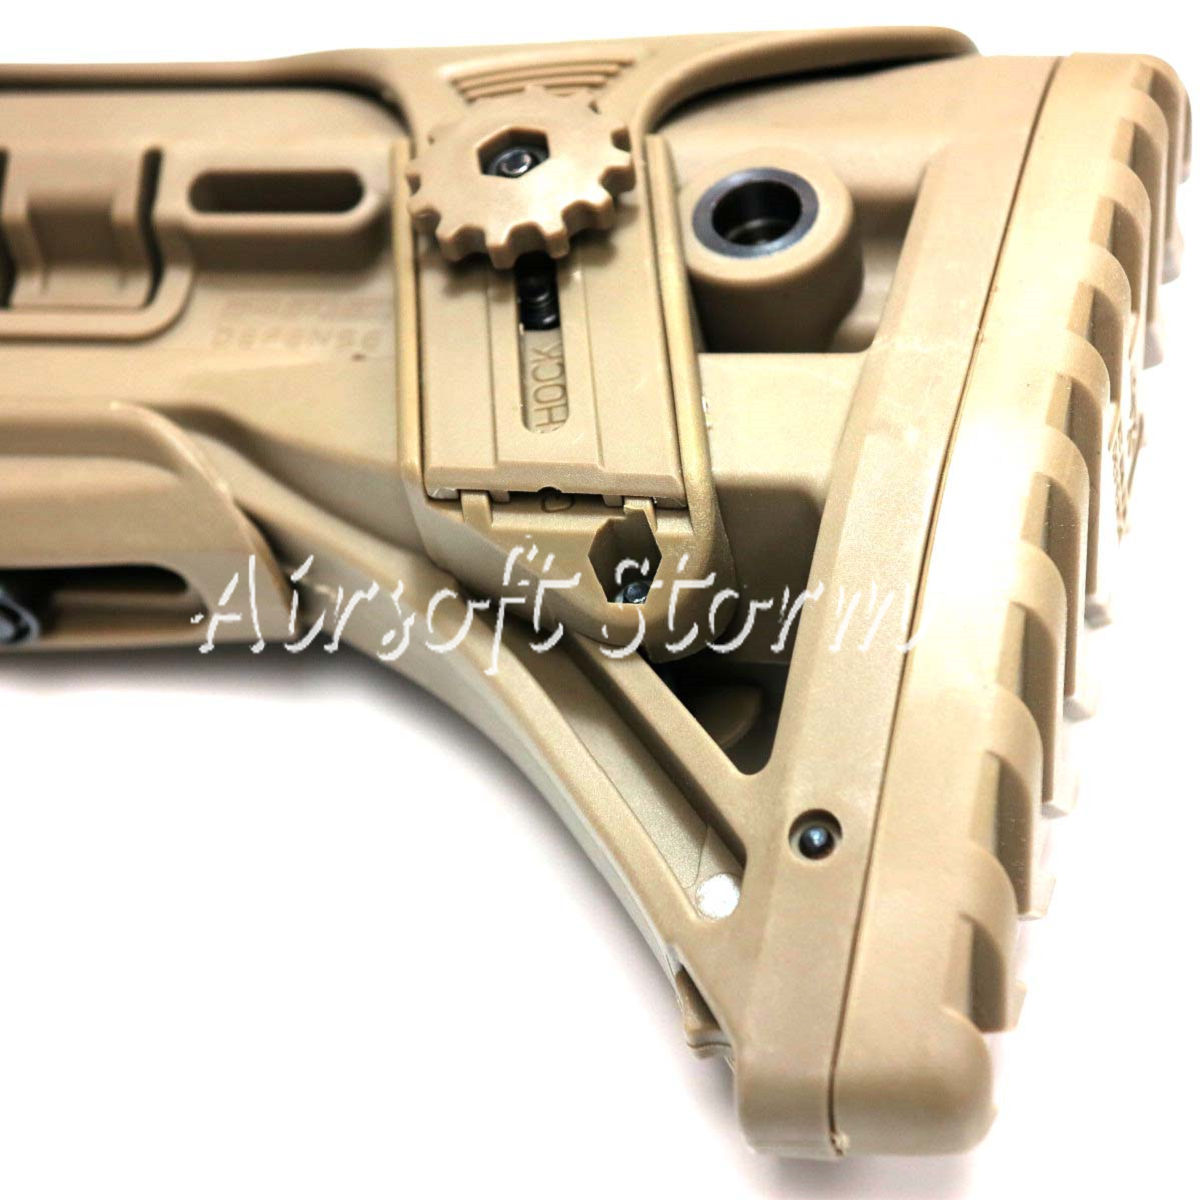 Airsoft Tactical Gear GL-Shock Style Recoil-Reducing M4/AR-15 Stock with Riser Dark Earth